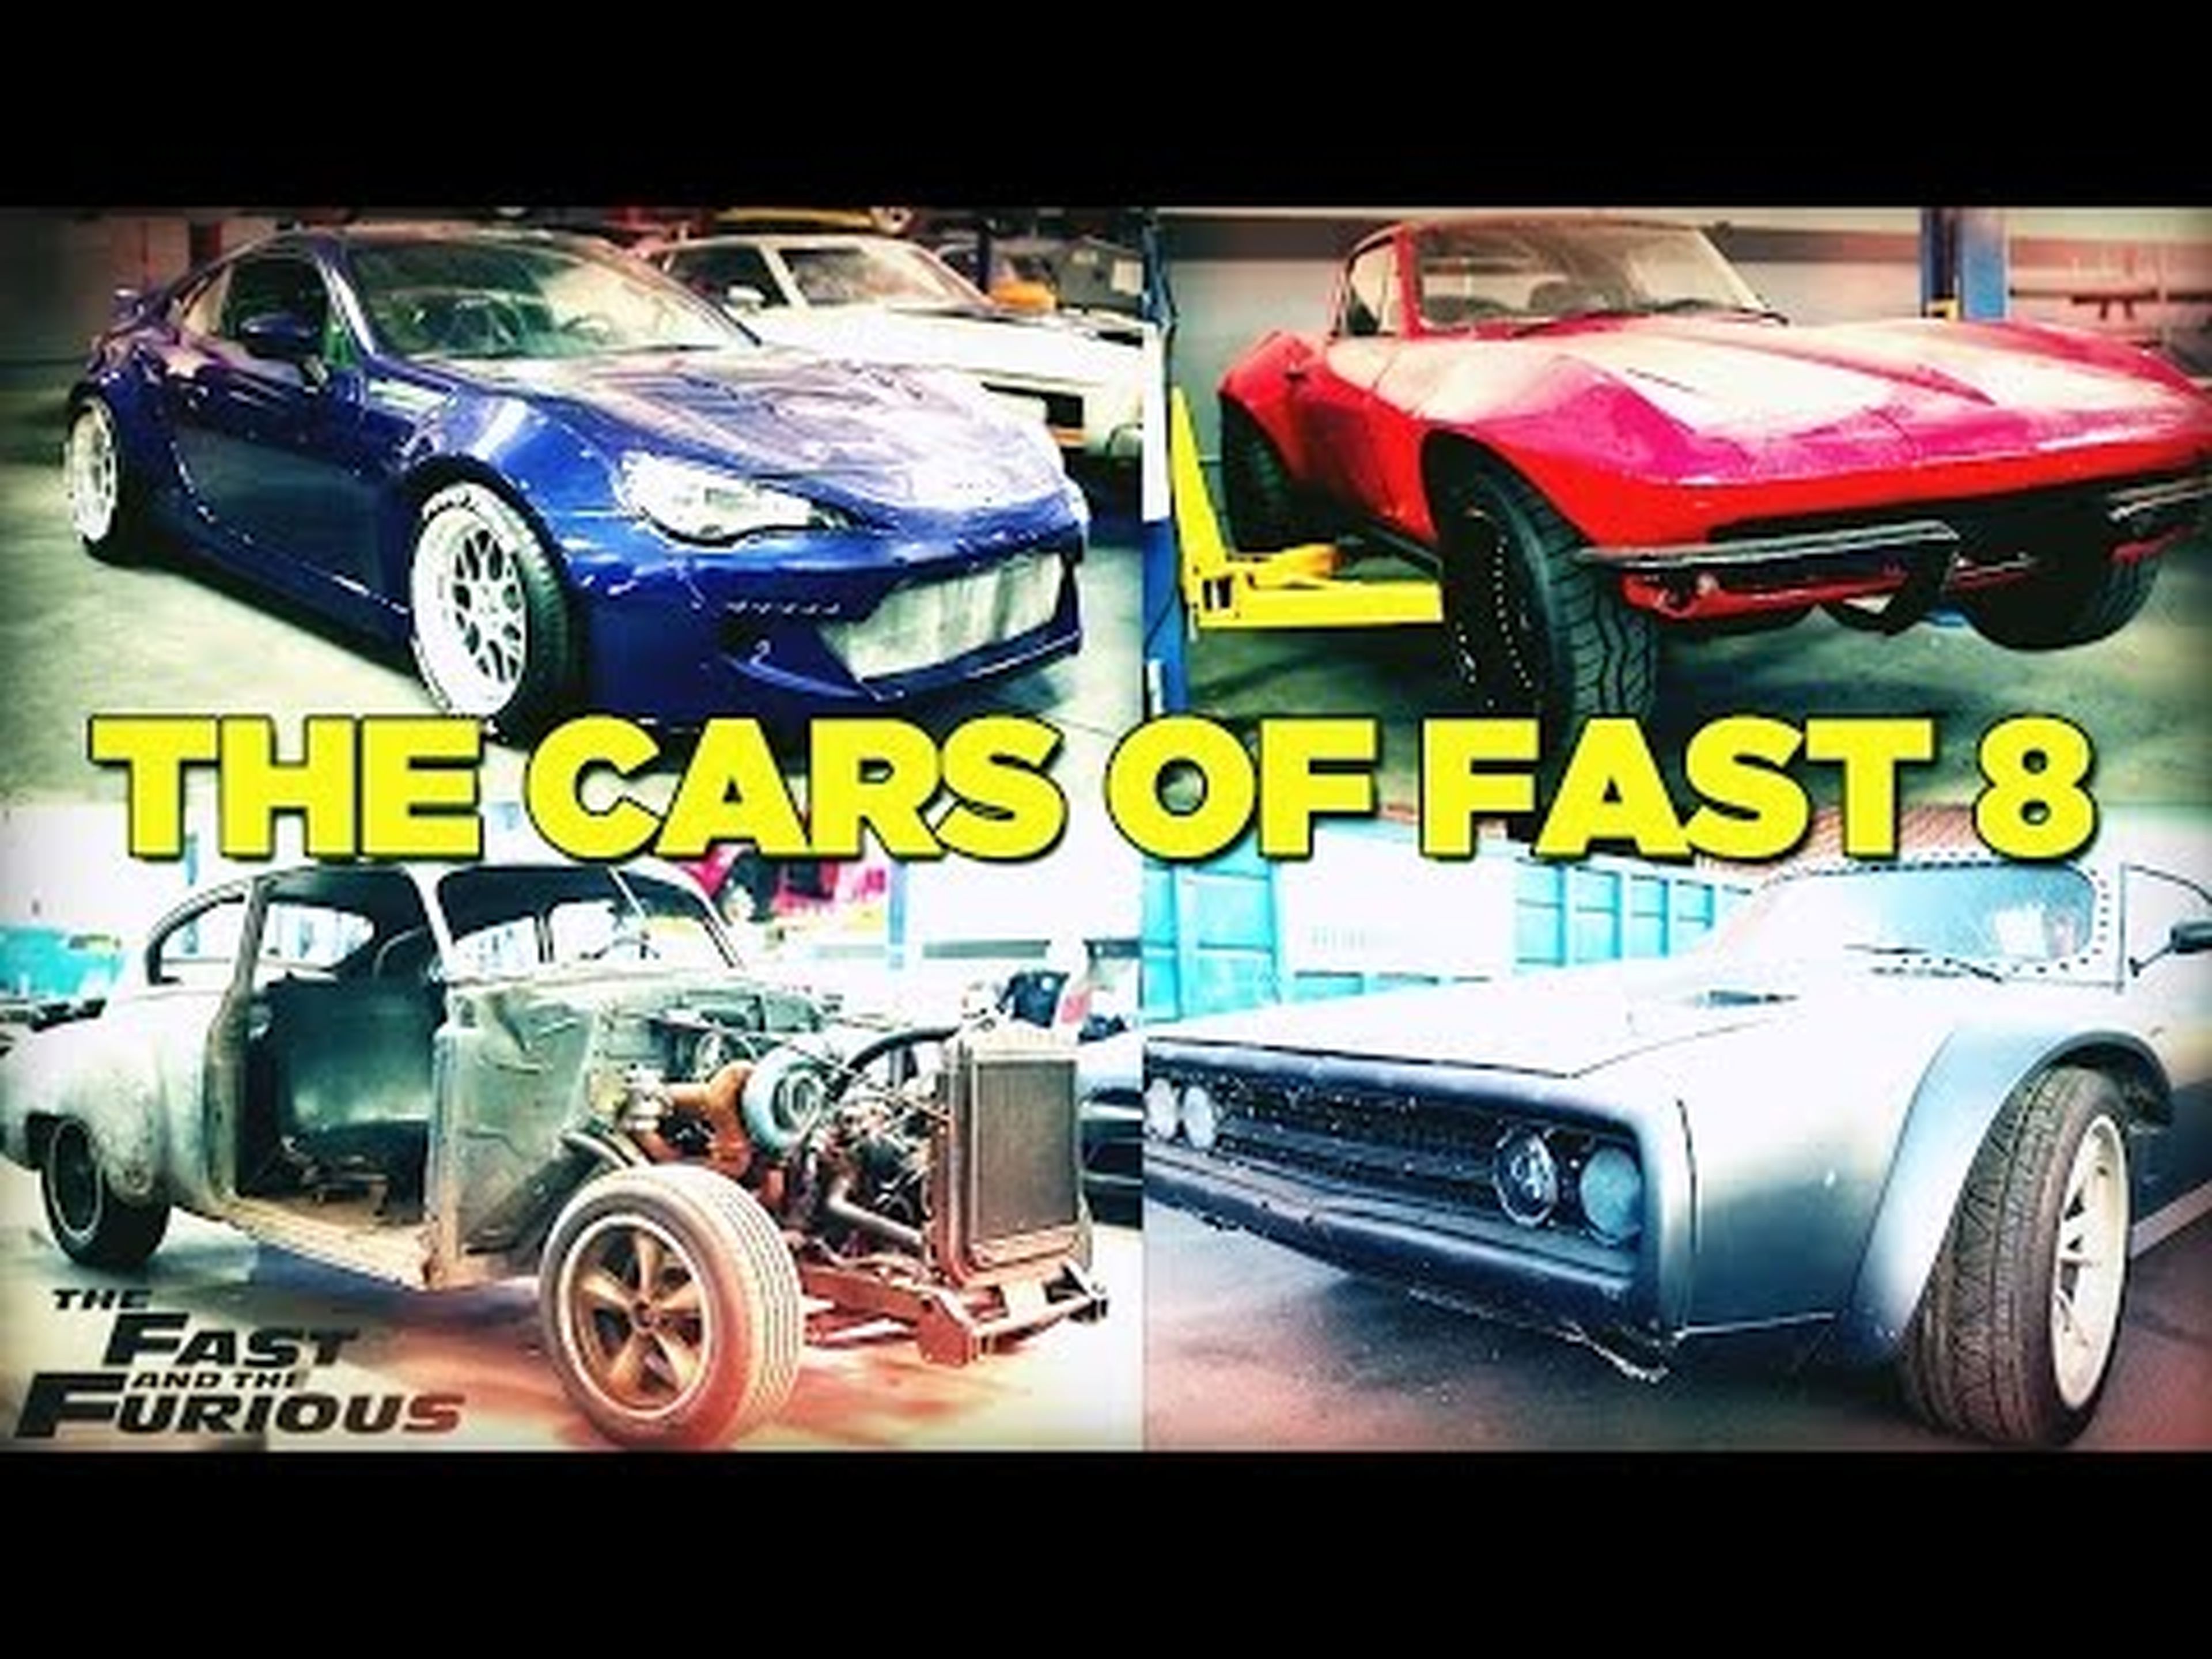 The Cars of Fast & Furious 8 [FAST8]